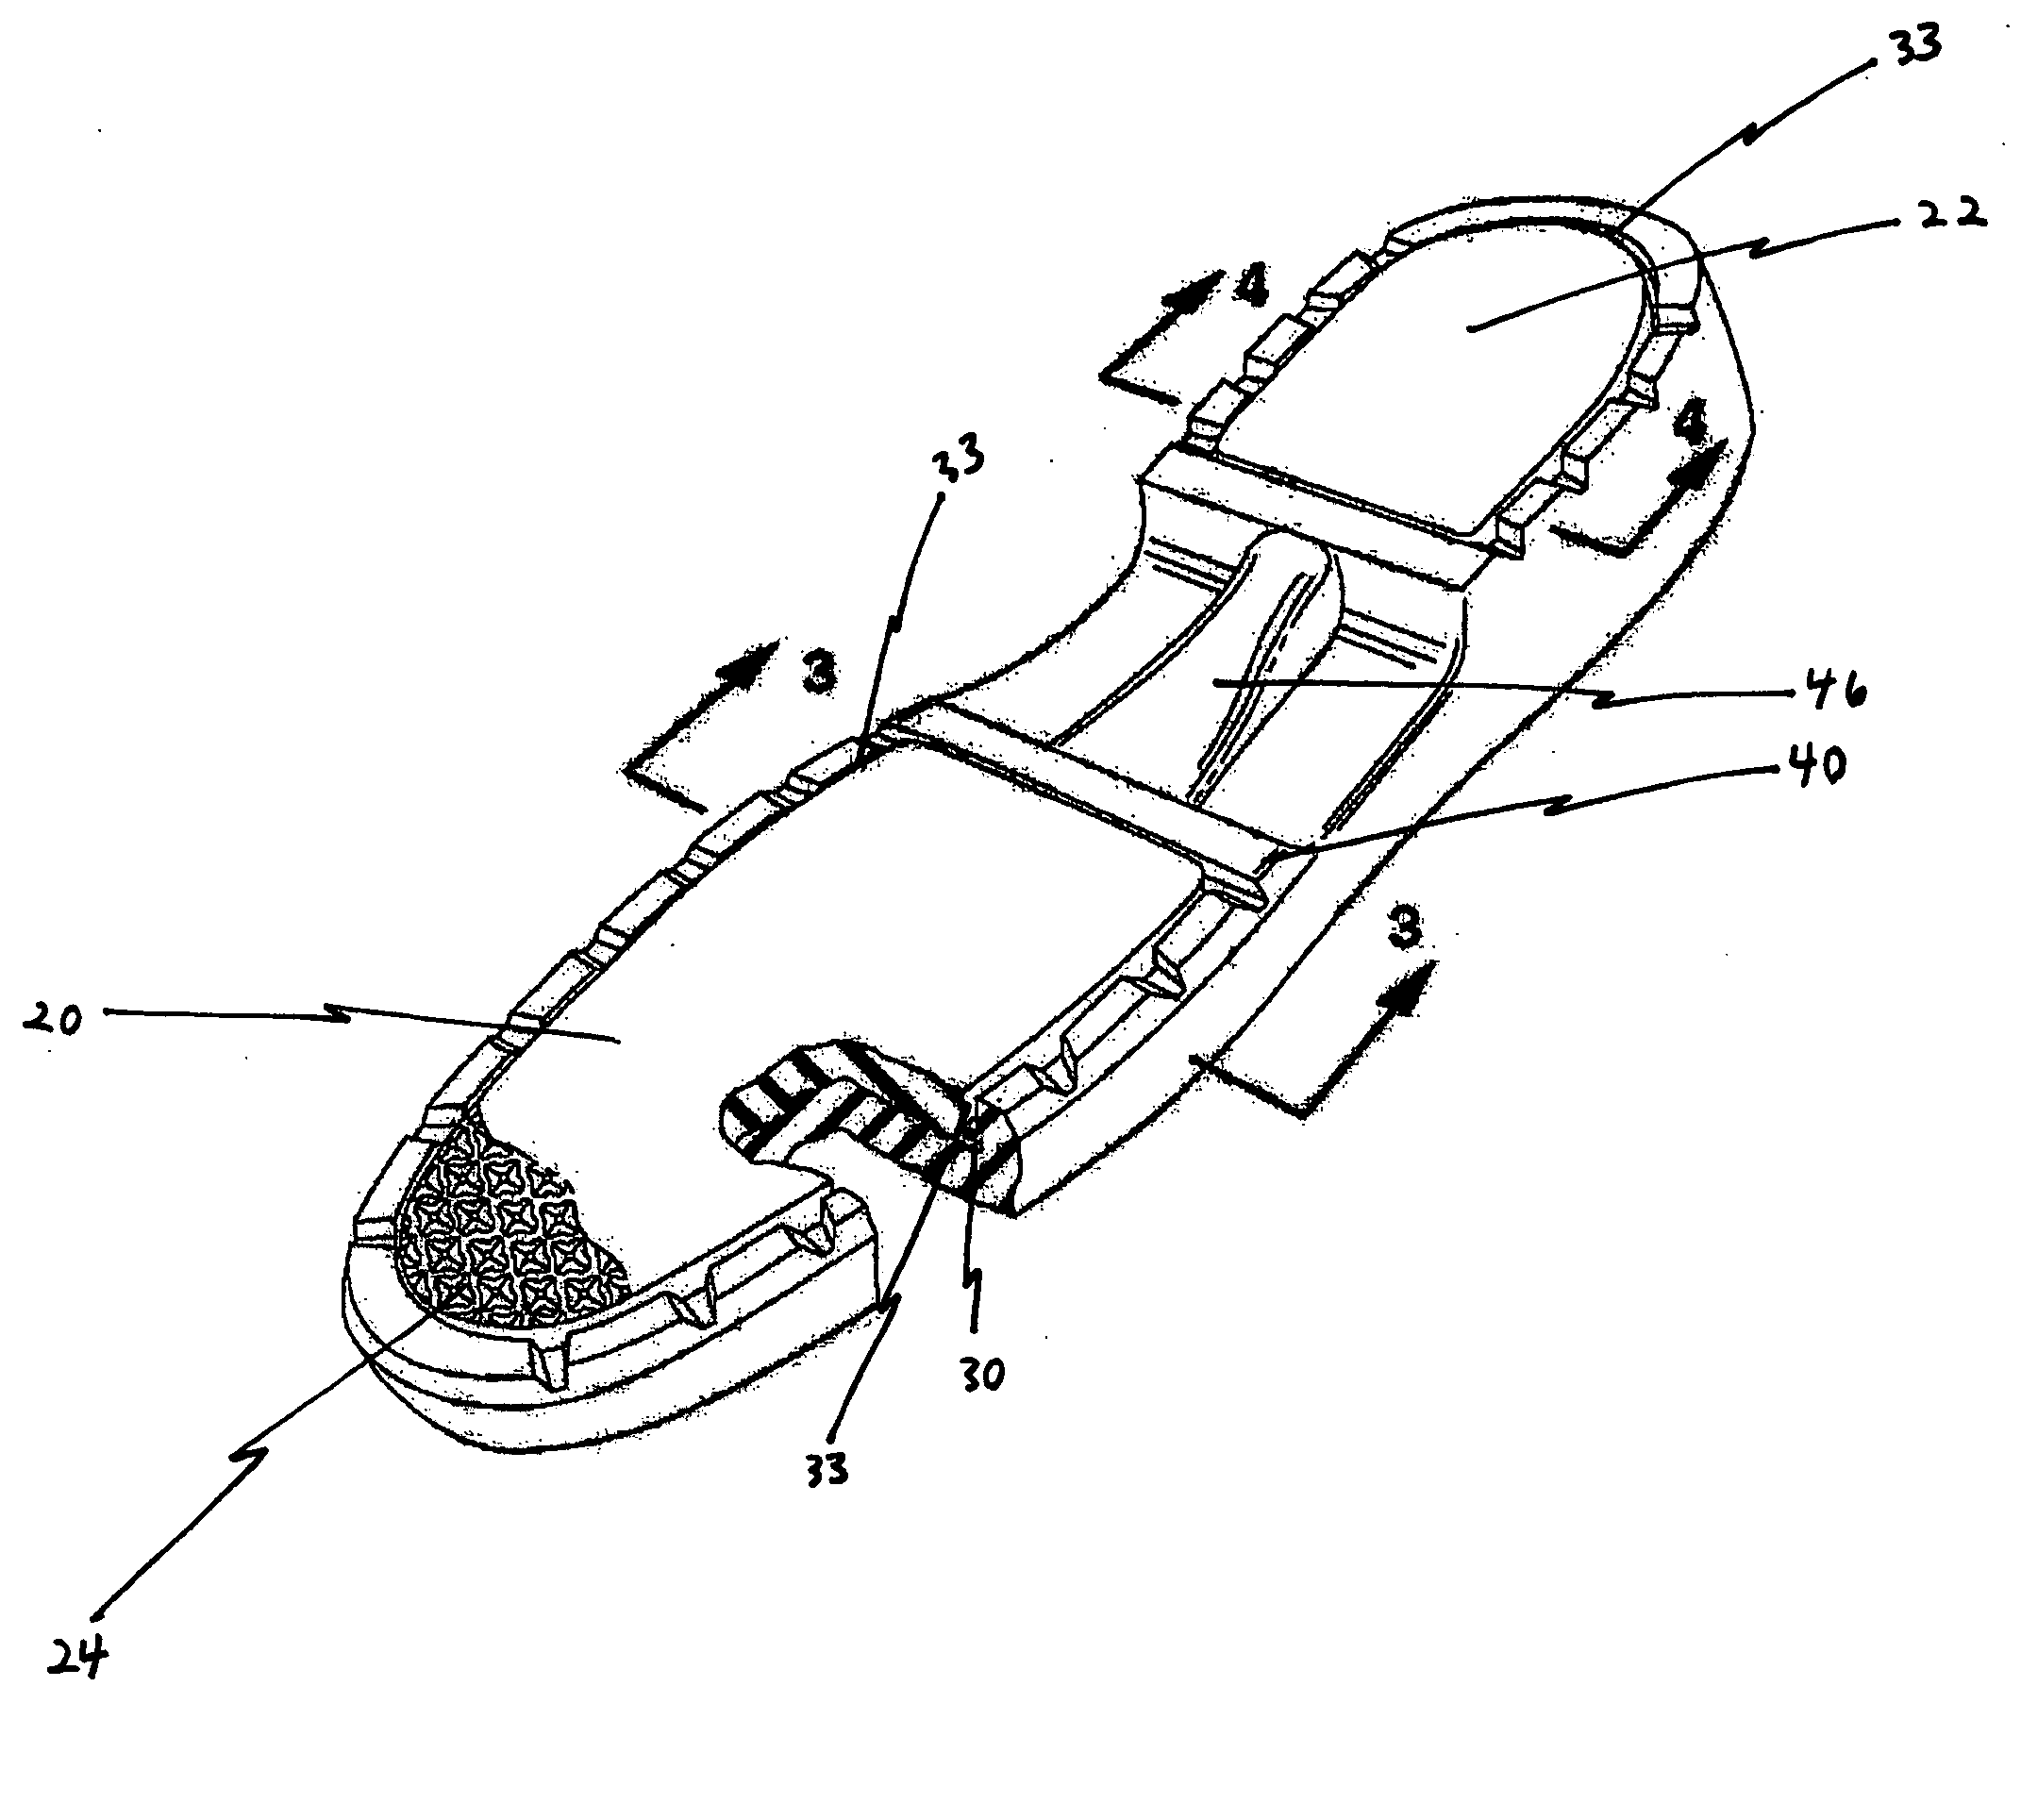 Footwear with improved sole, improved sole and method for manufacturing